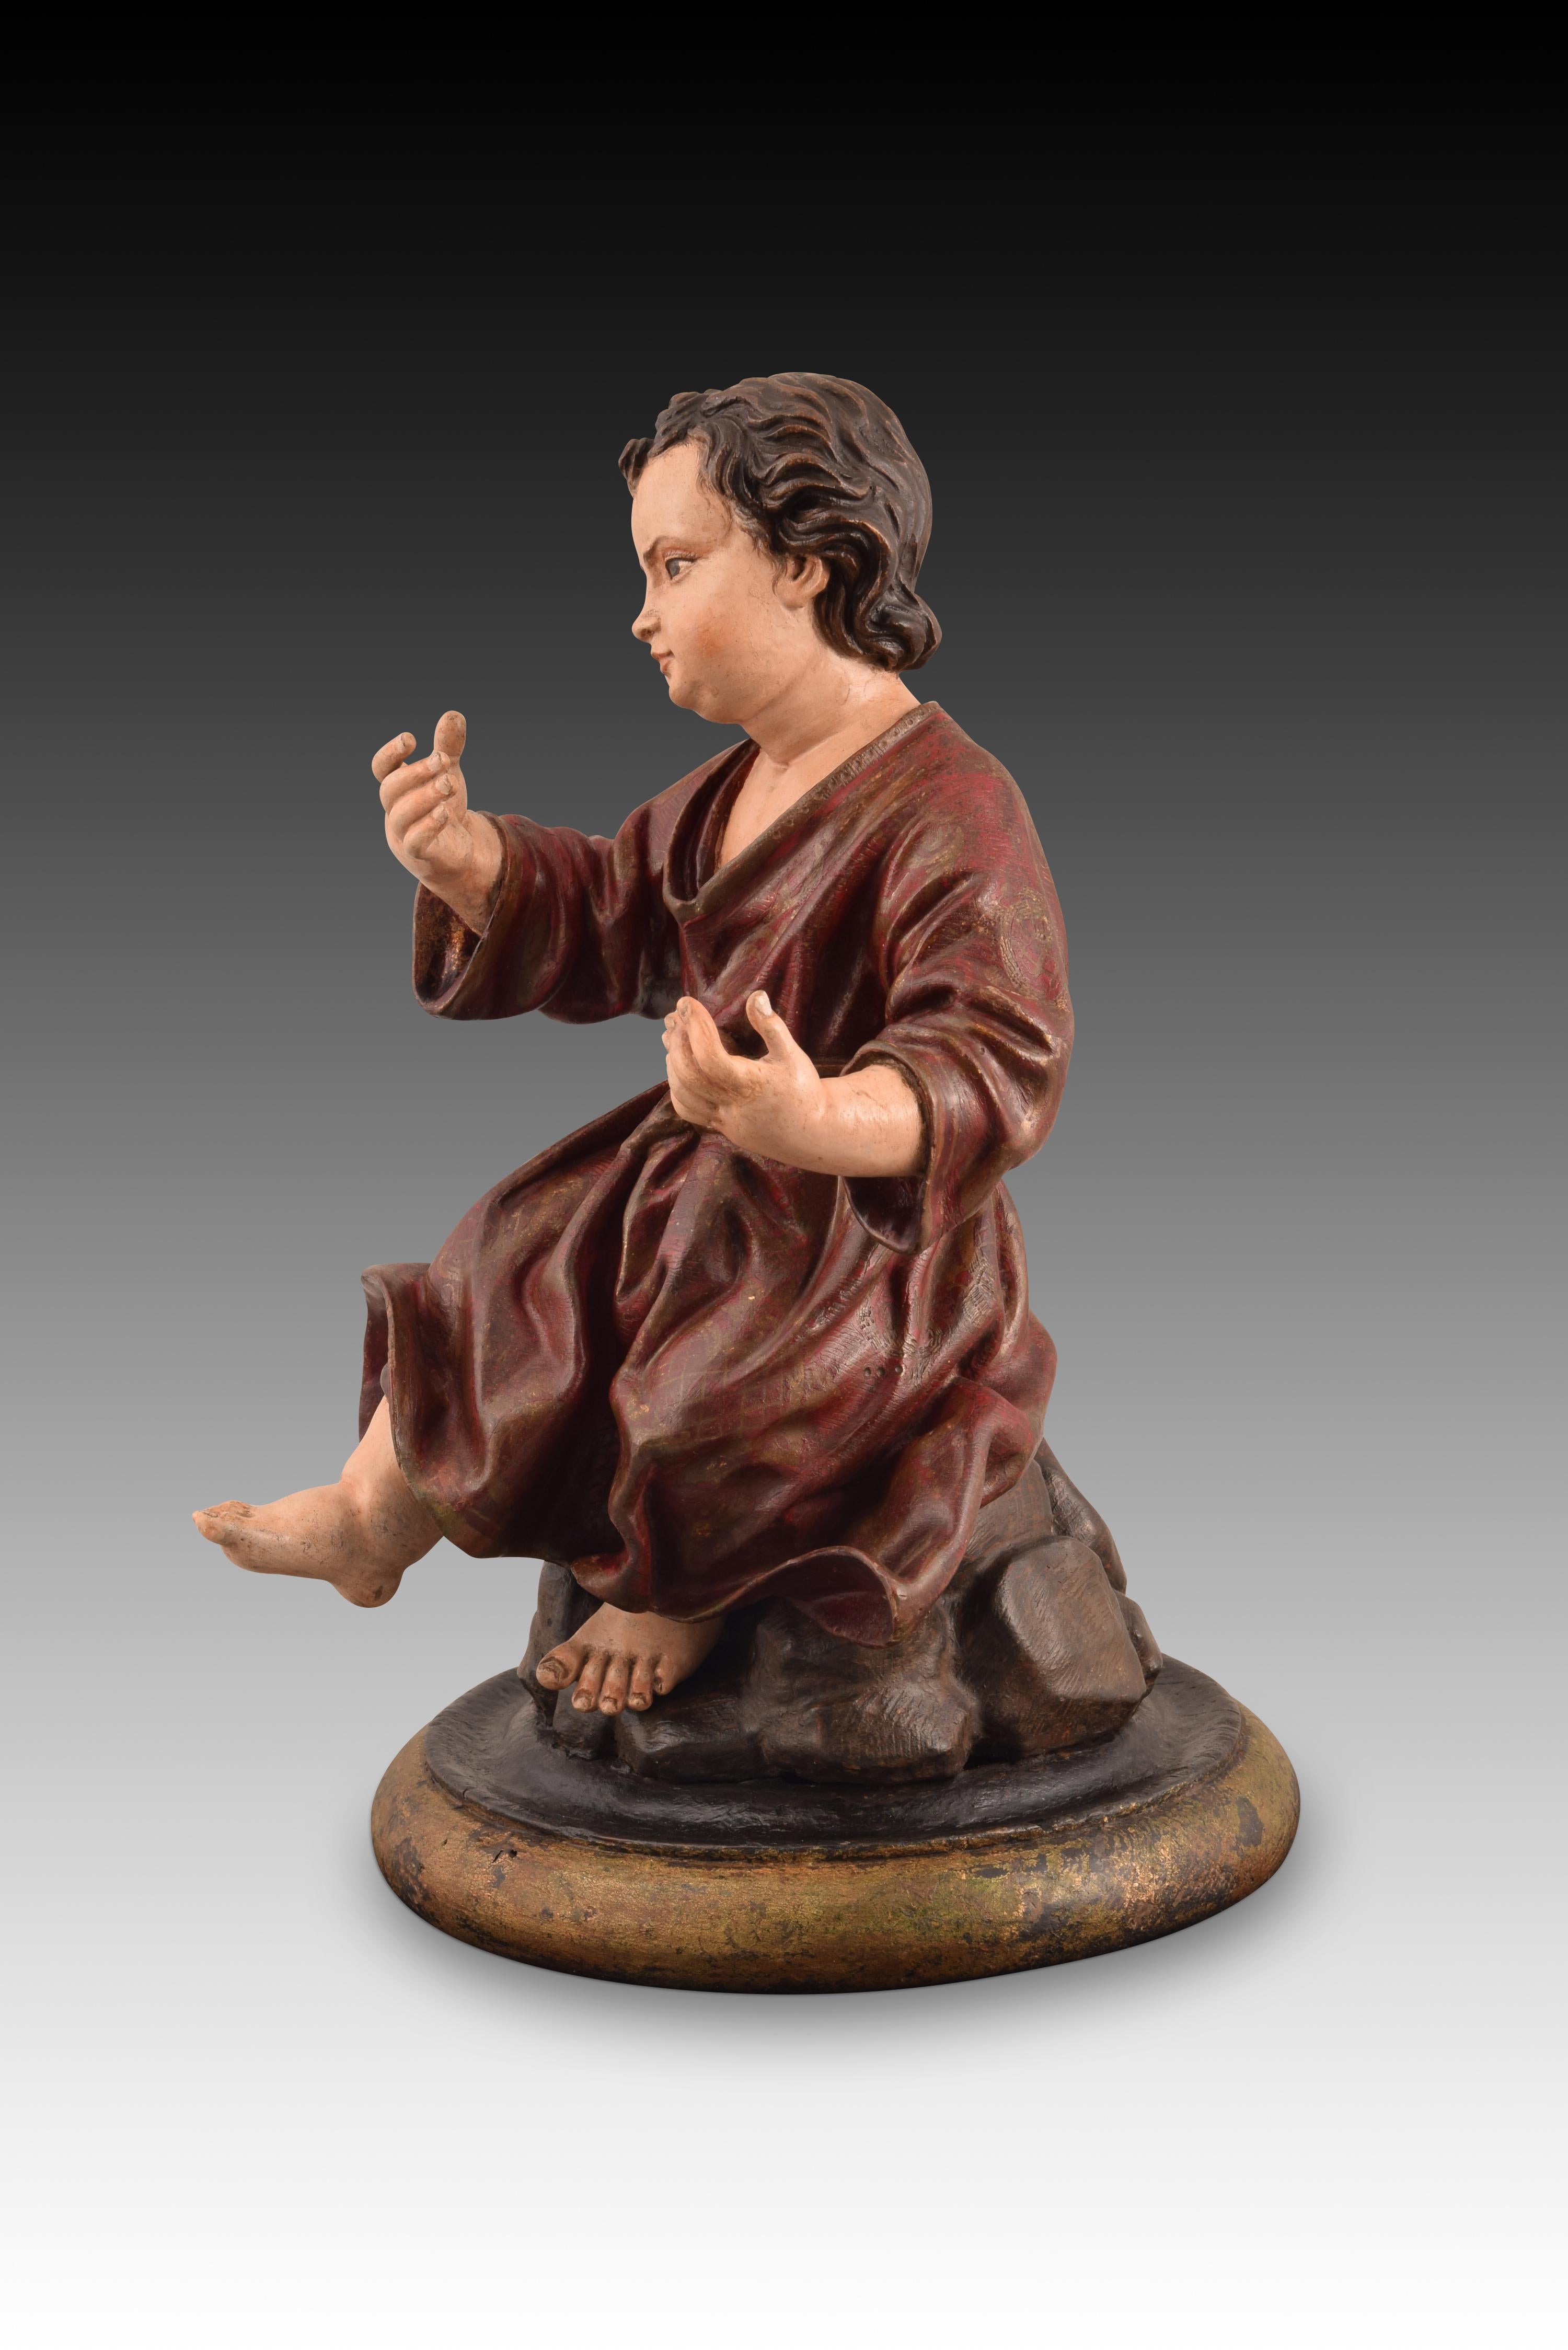 Baby Jesus Passionist or Passionate. Carved and polychrome wood. Andalusian school, 18th century. 
Seated on a rocky promontory on a circular base, the polychrome wood carving of the Child Jesus is presented in a long-sleeved dress, tied with a belt